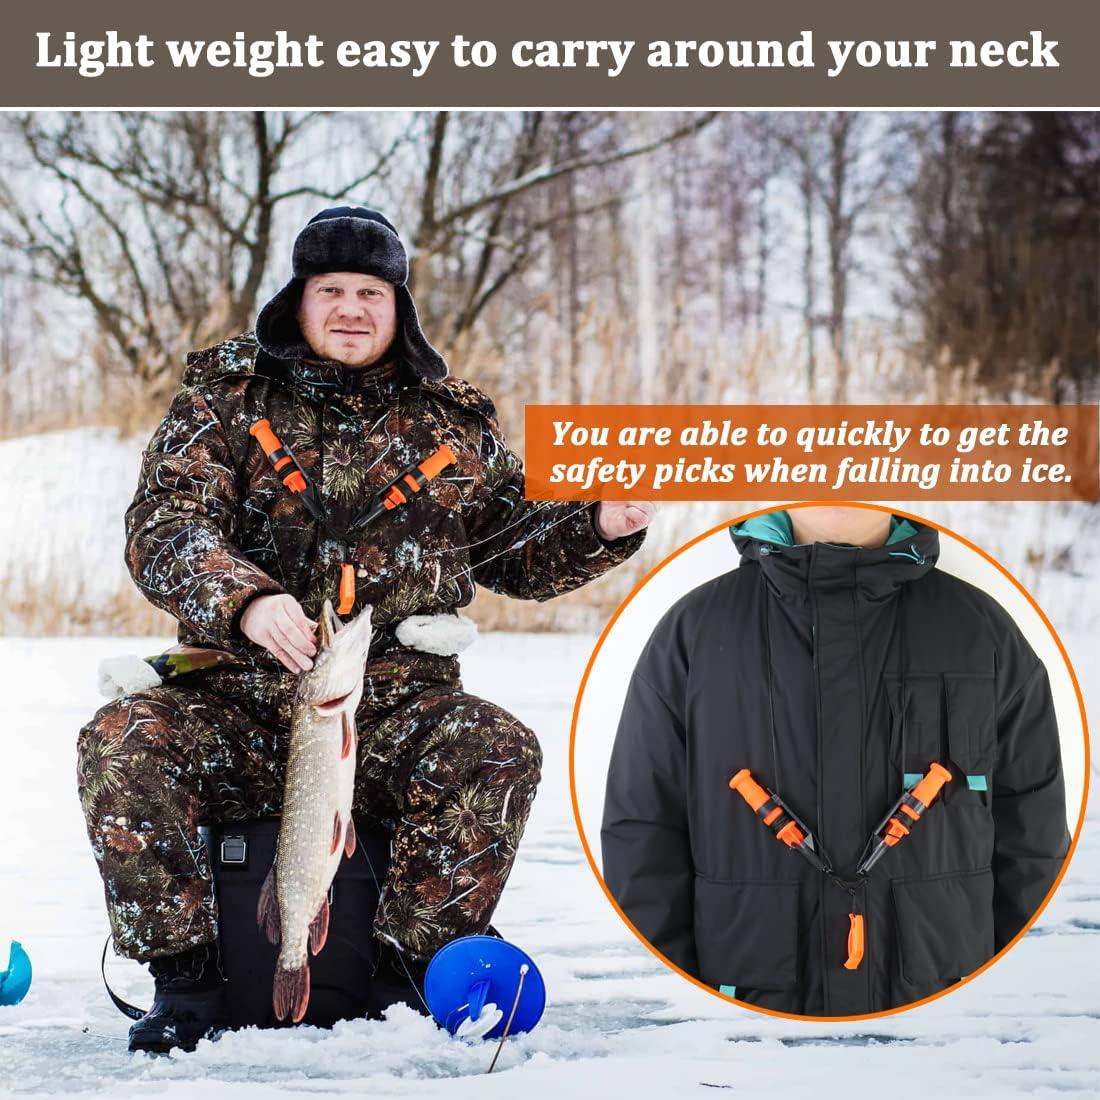 Boaton Ice Safety Picks, Safety Kits for Ice Fishing and Ice